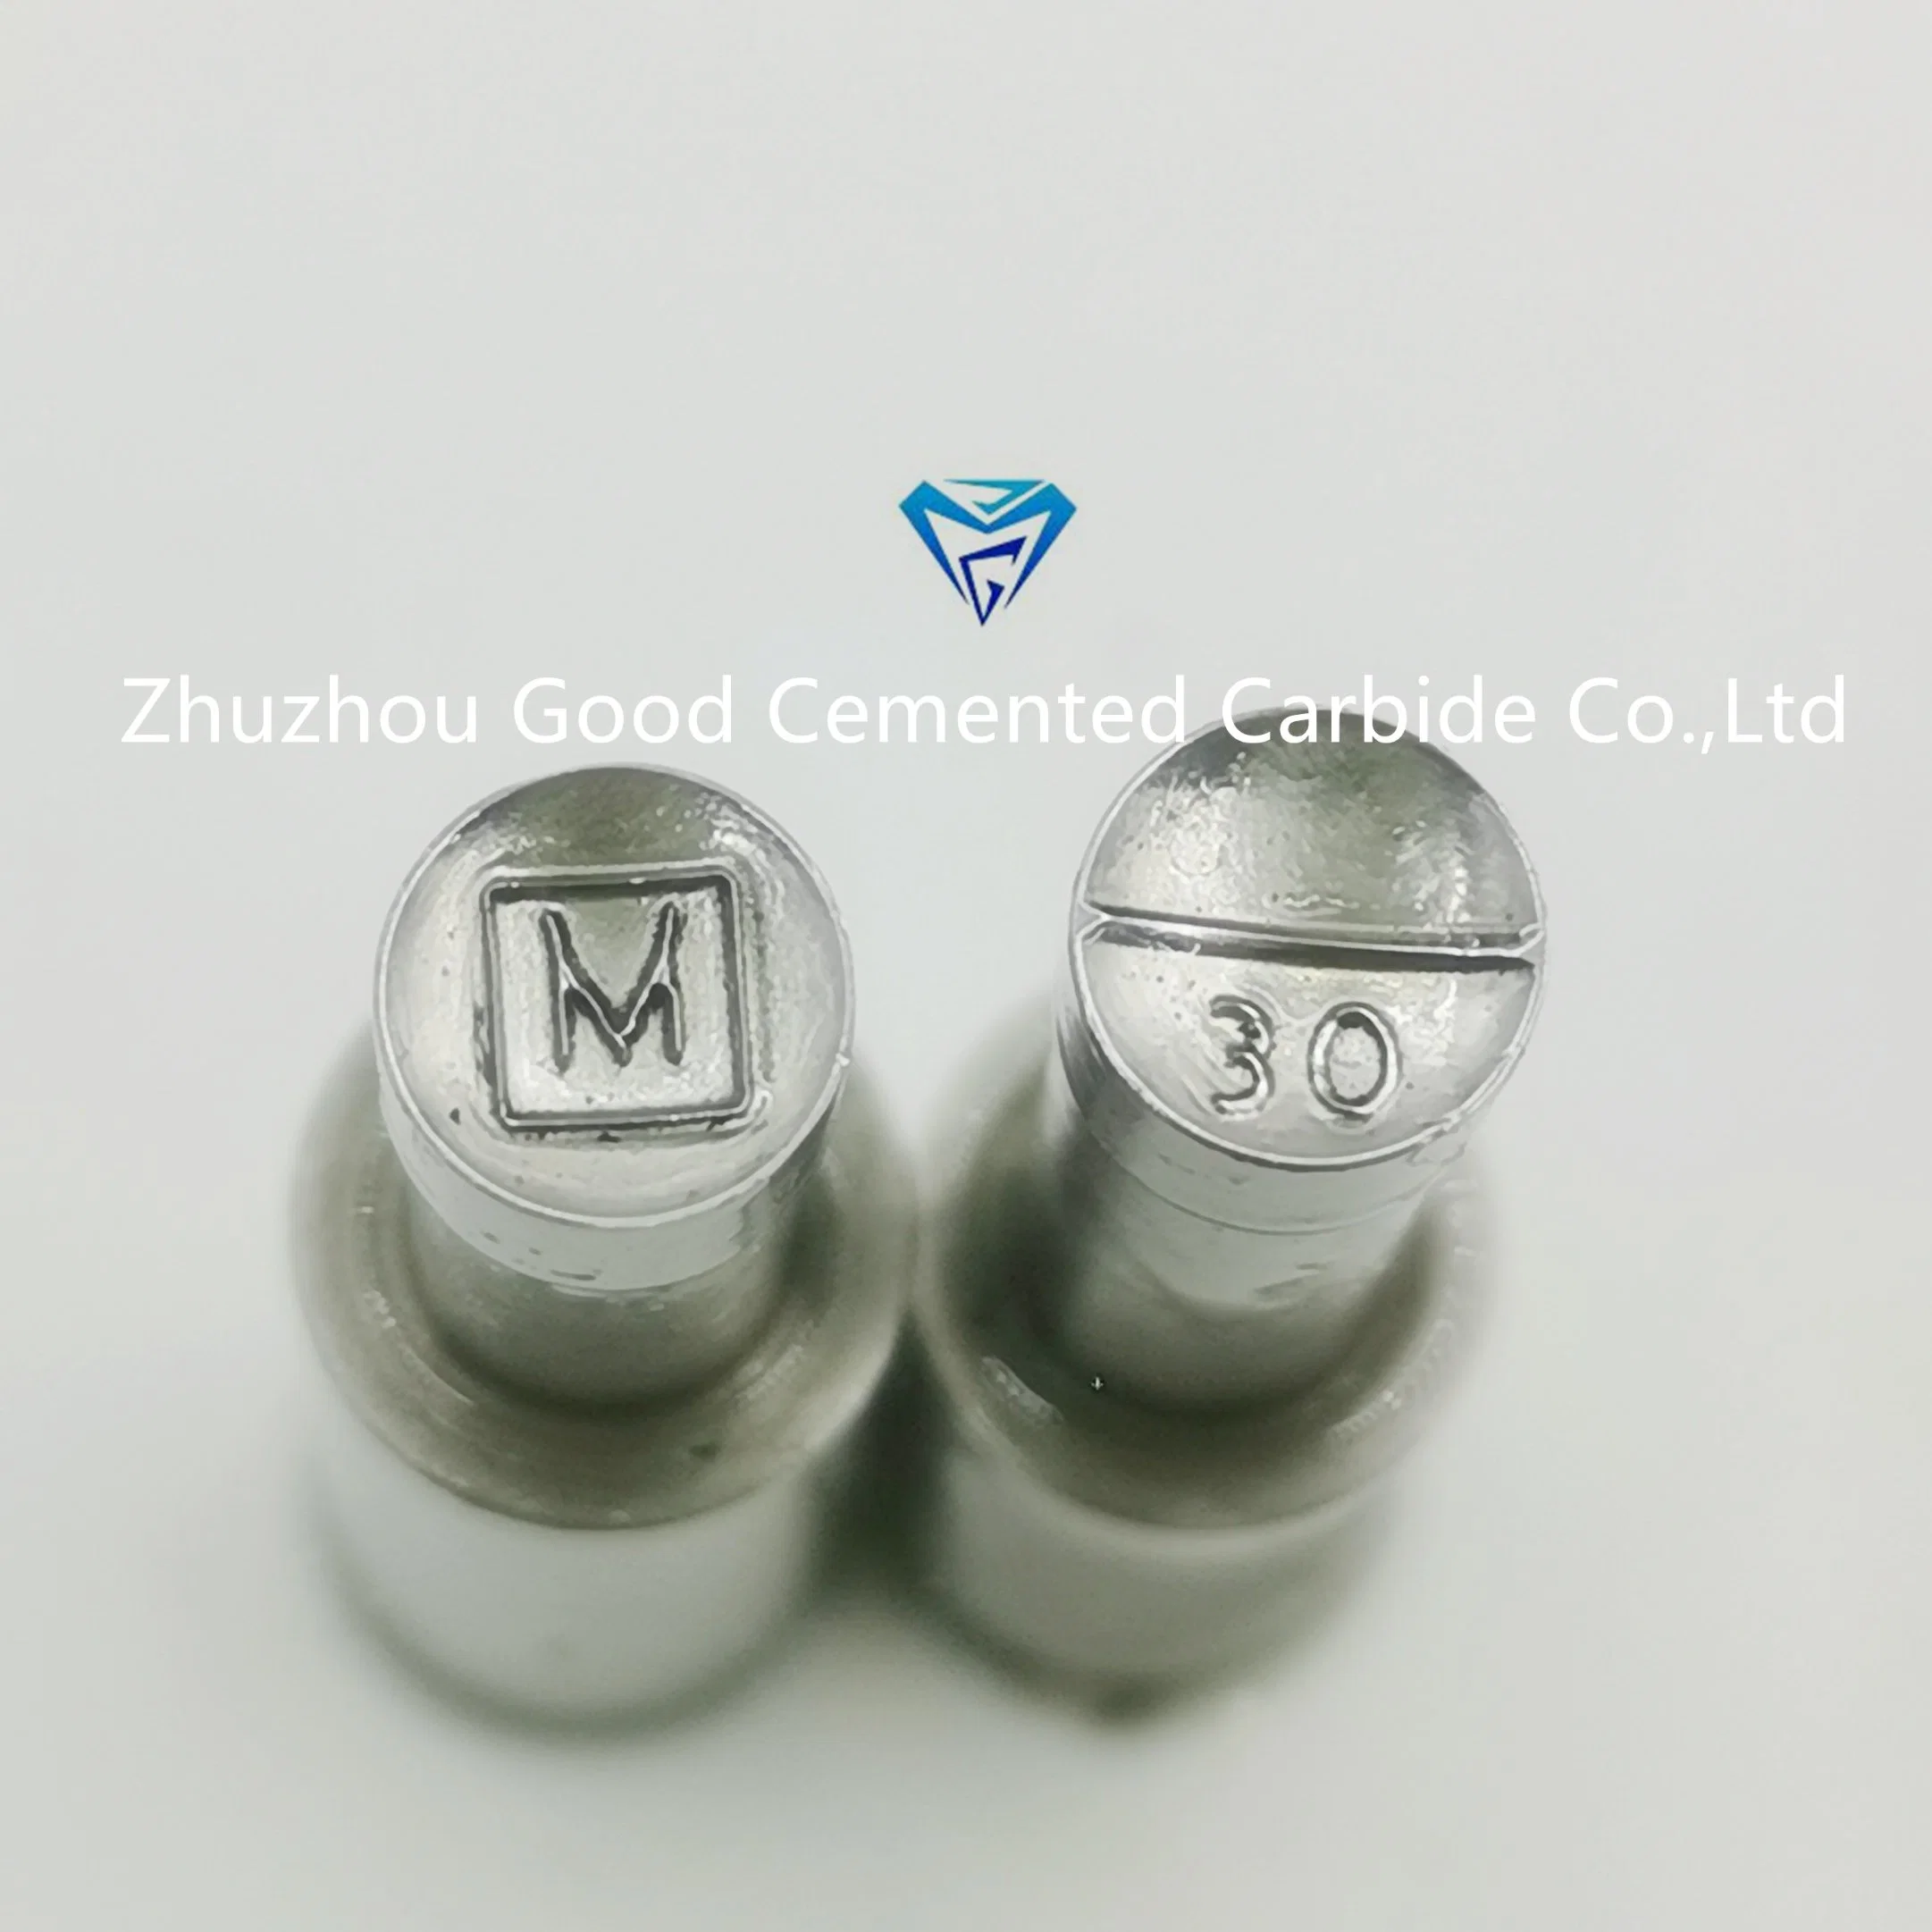 Number M30 Pill 3D Round Mold Tdp Machine Tool Sugar Stamp Candy Press Punch Die Set for Tdp0/ Tdp 1.5 or Tdp5 Tdp6 Molds Machine Moulds Stamp Dies